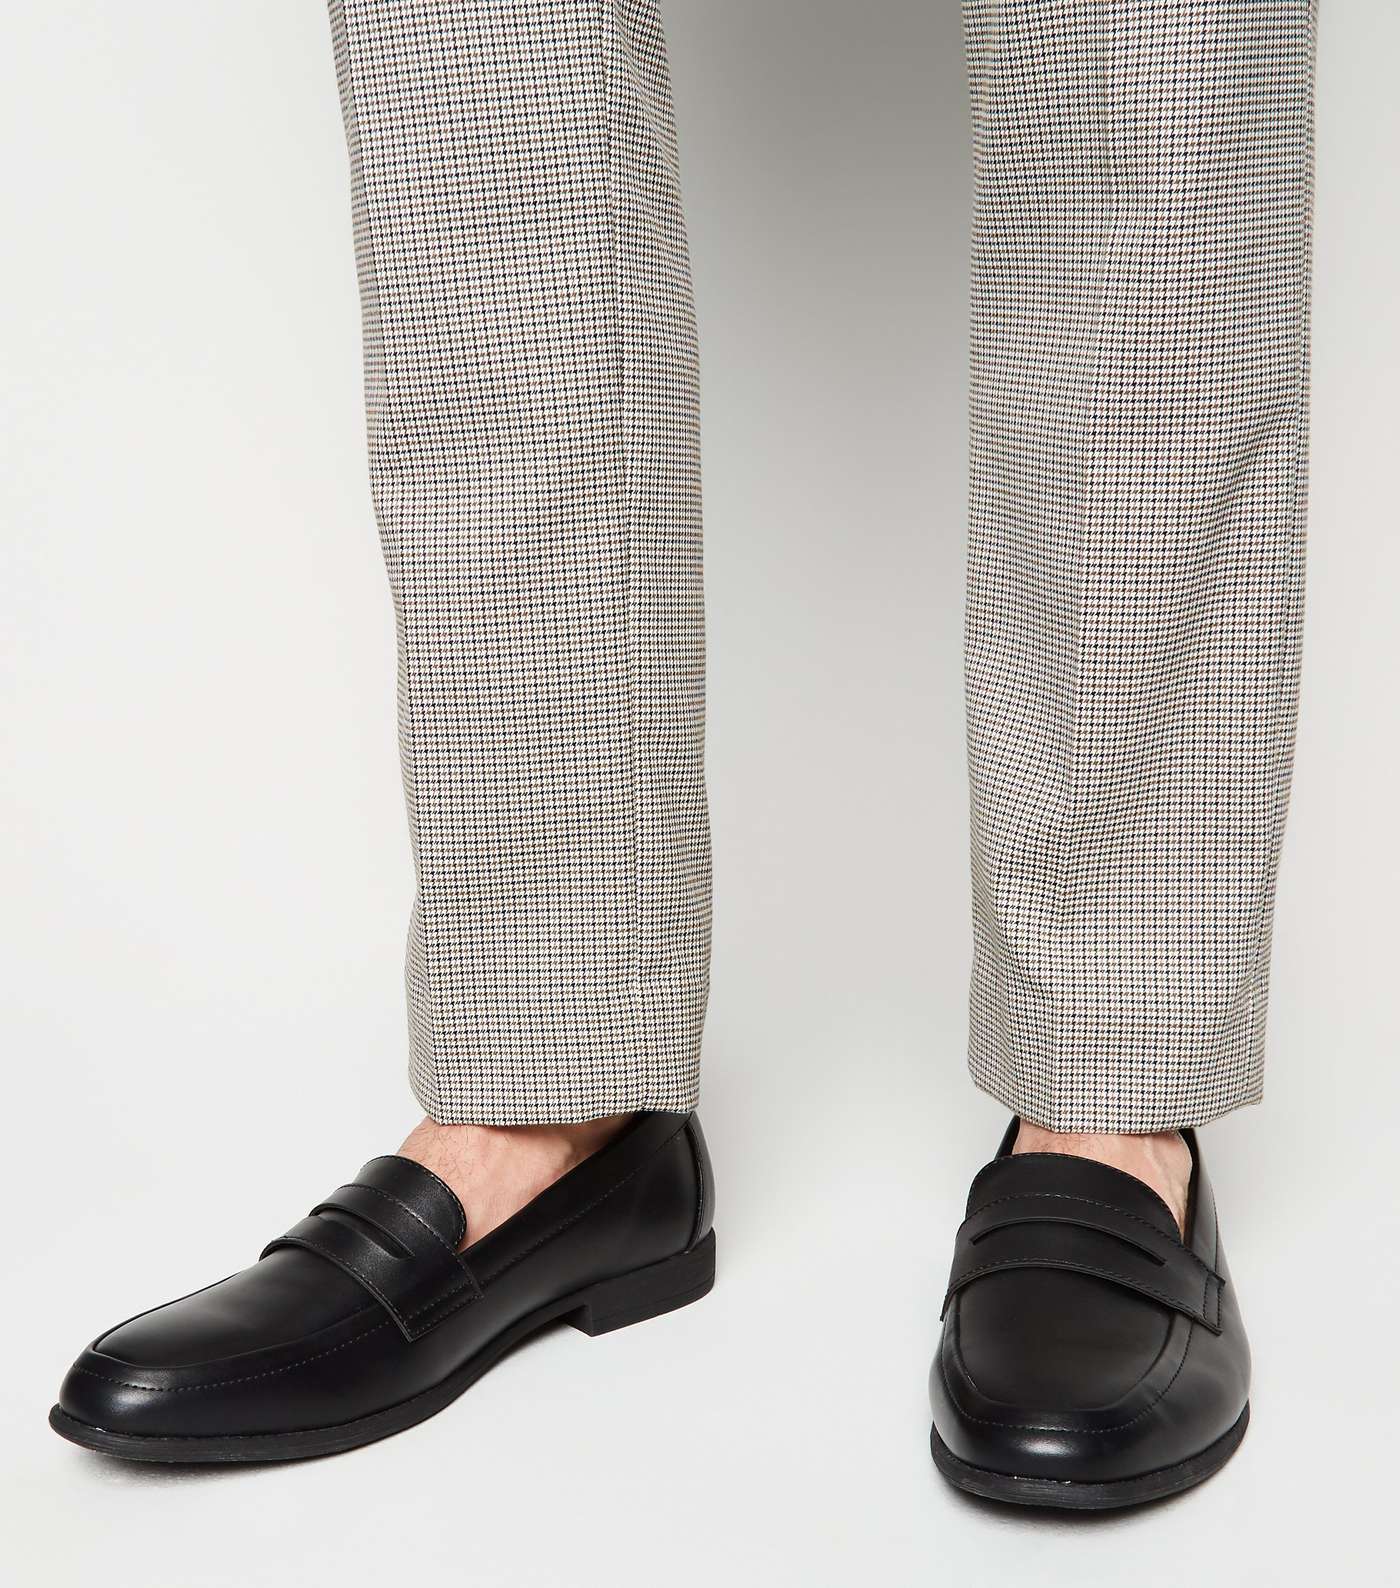 Black Leather-Look Penny Loafers Image 2